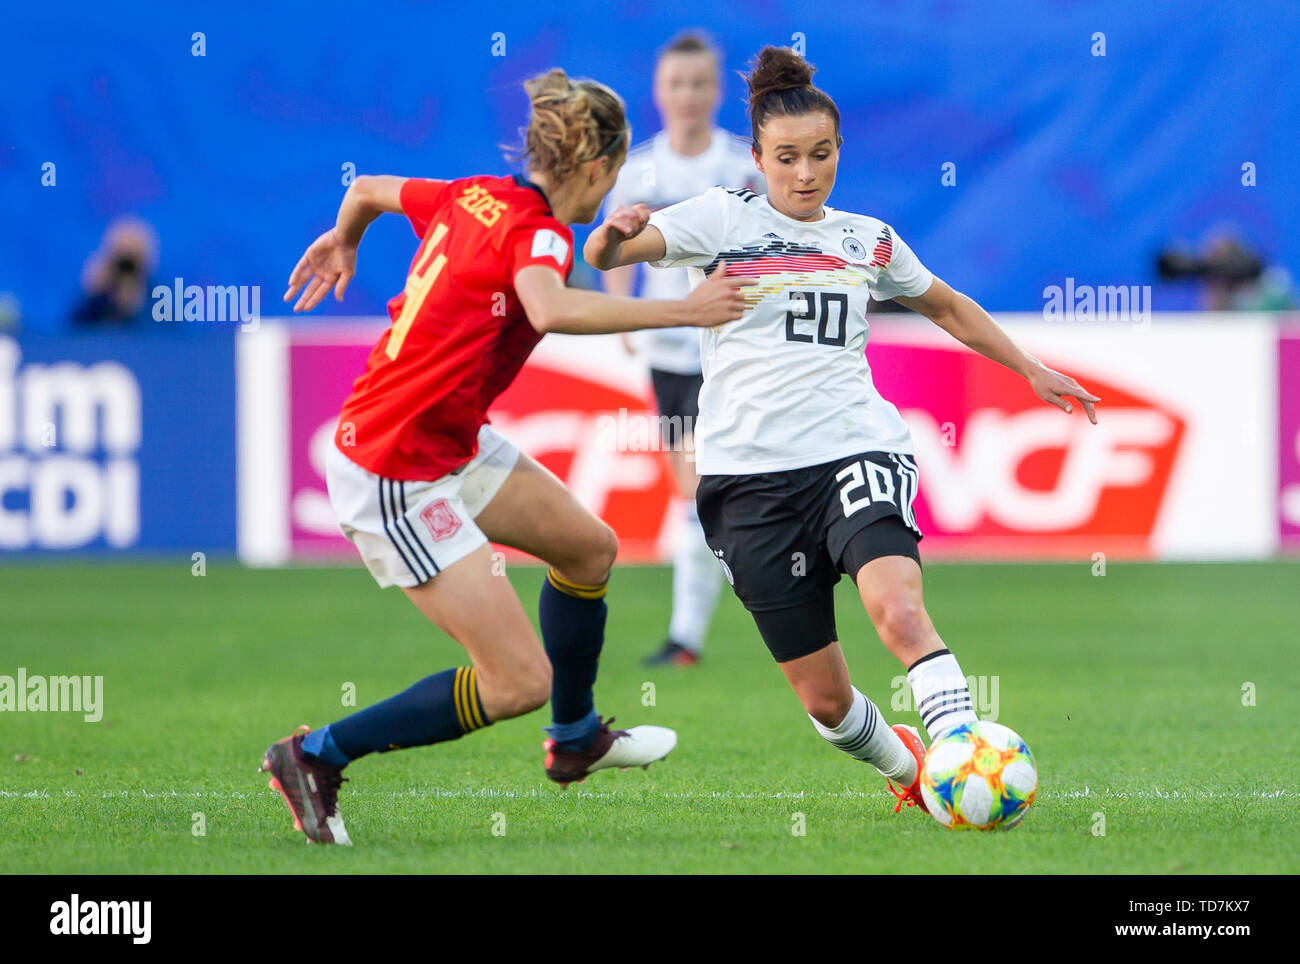 Valenciennes, Frankreich. 12th June, 2019. France, Valenciennes, Stade du Hainaut, 12.06.2019, Football - FIFA Women's World Cup - Germany - Spain Credit: vl Irene Paredes (Spain, # 4) and Lina Magult (Germany, # 20) | usage worldwide/dpa/Alamy Live News Stock Photo